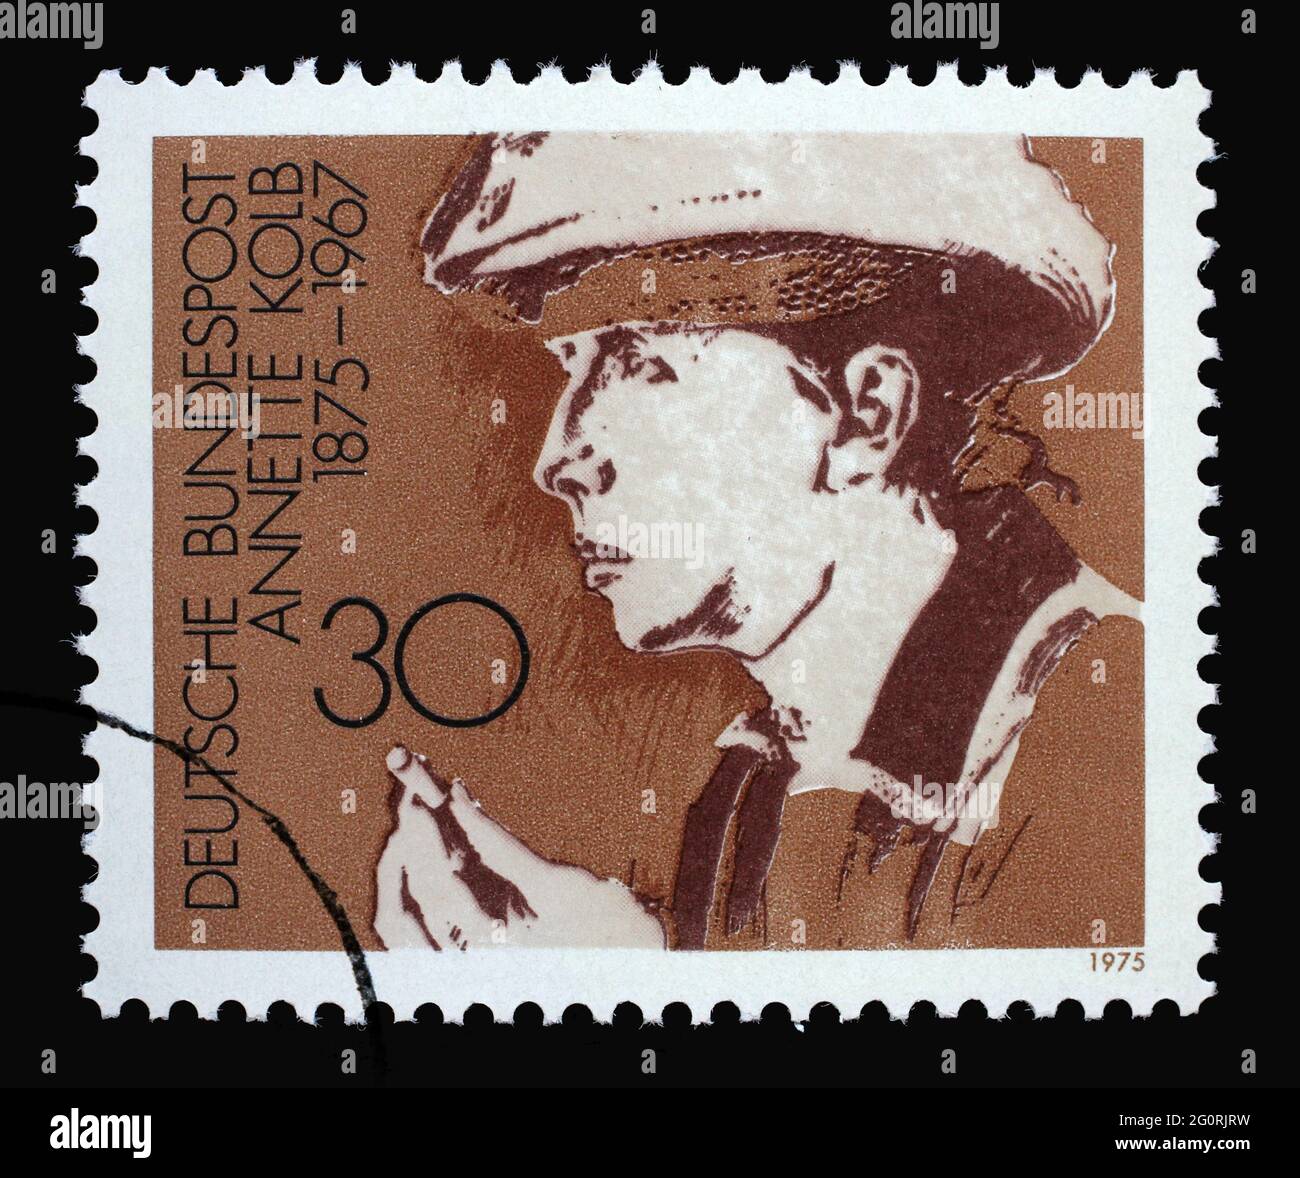 A stamp printed in Germany showing a portrait of the writer Annette Kolb, circa 1975 Stock Photo